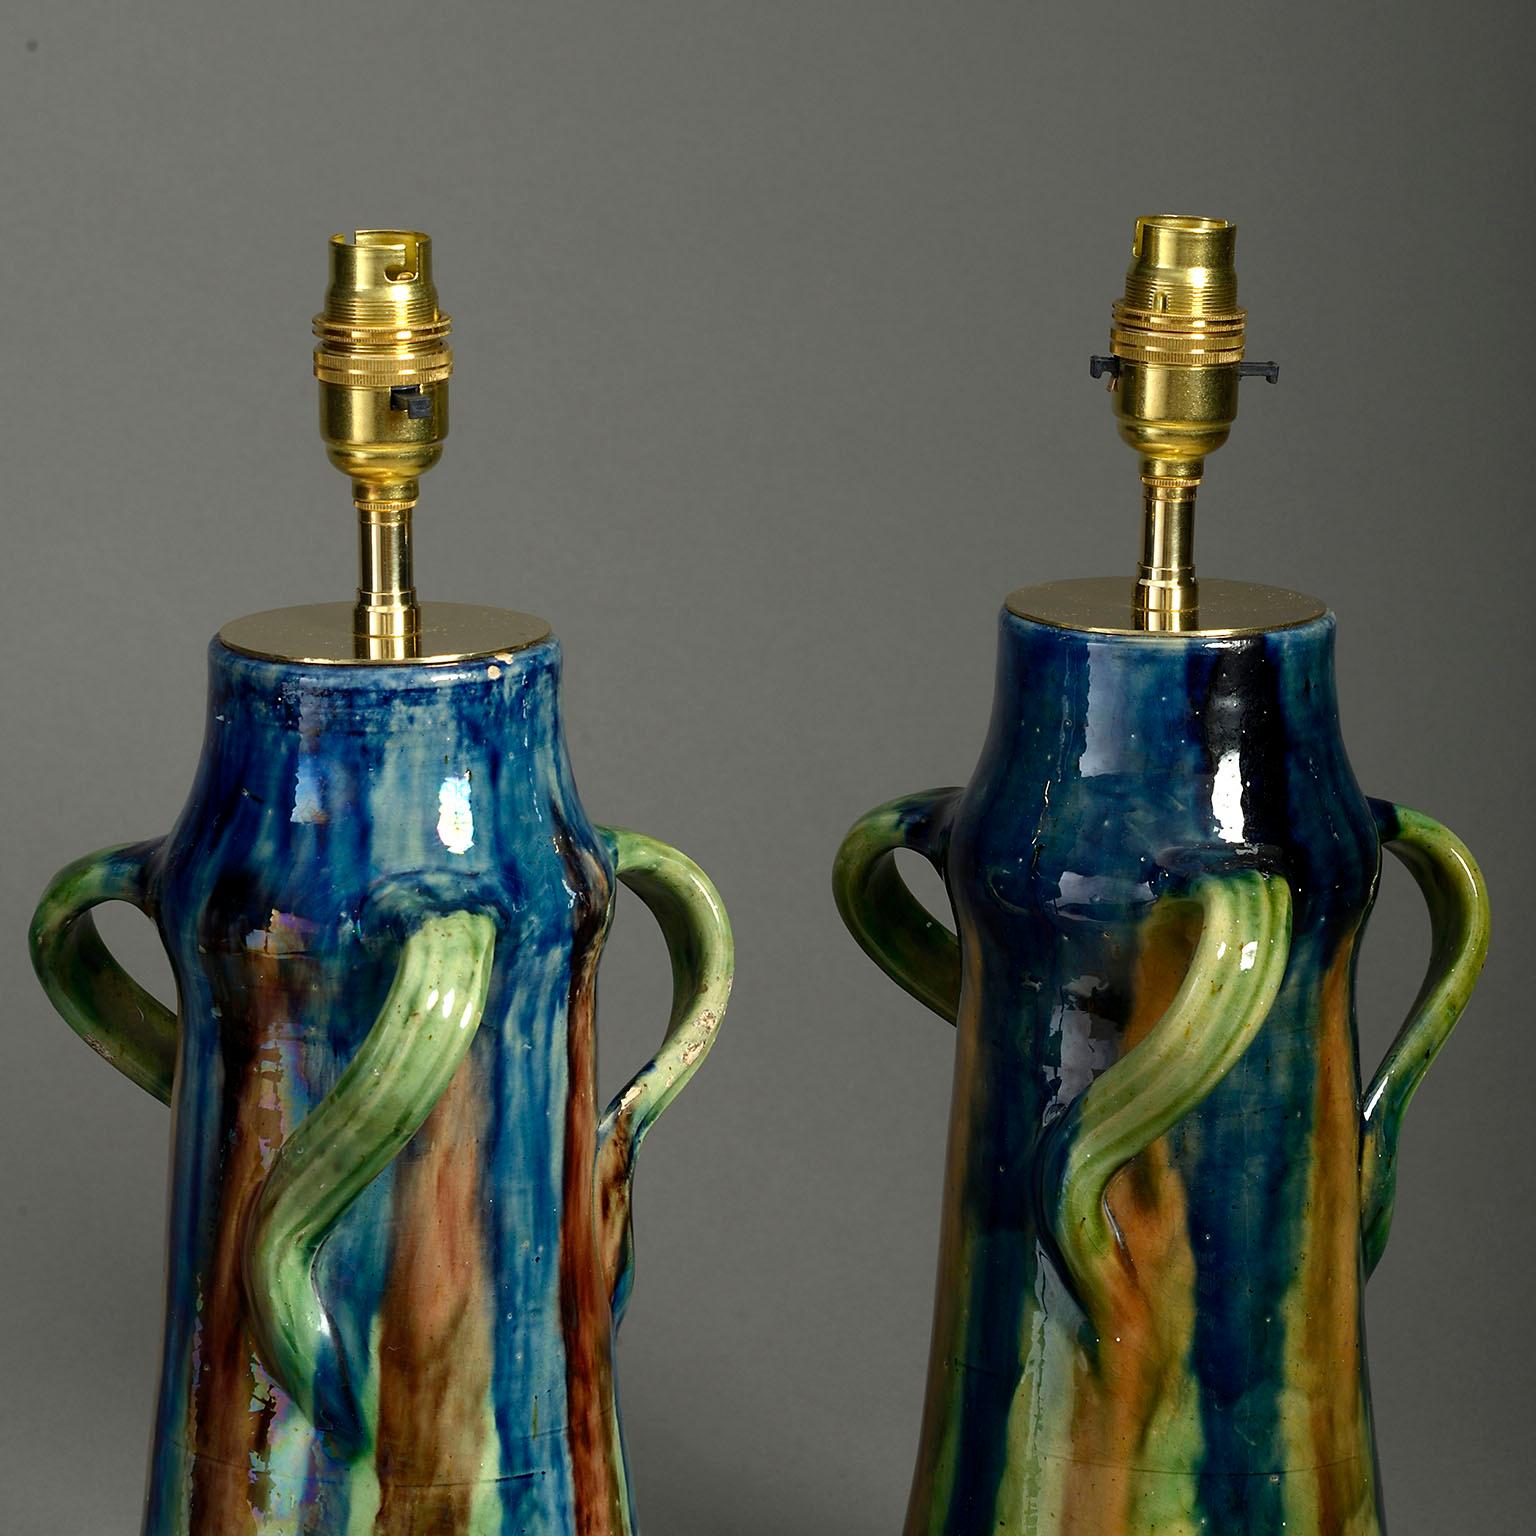 Fired Pair of 19th Century Art Nouveau Pottery Vase Lamps